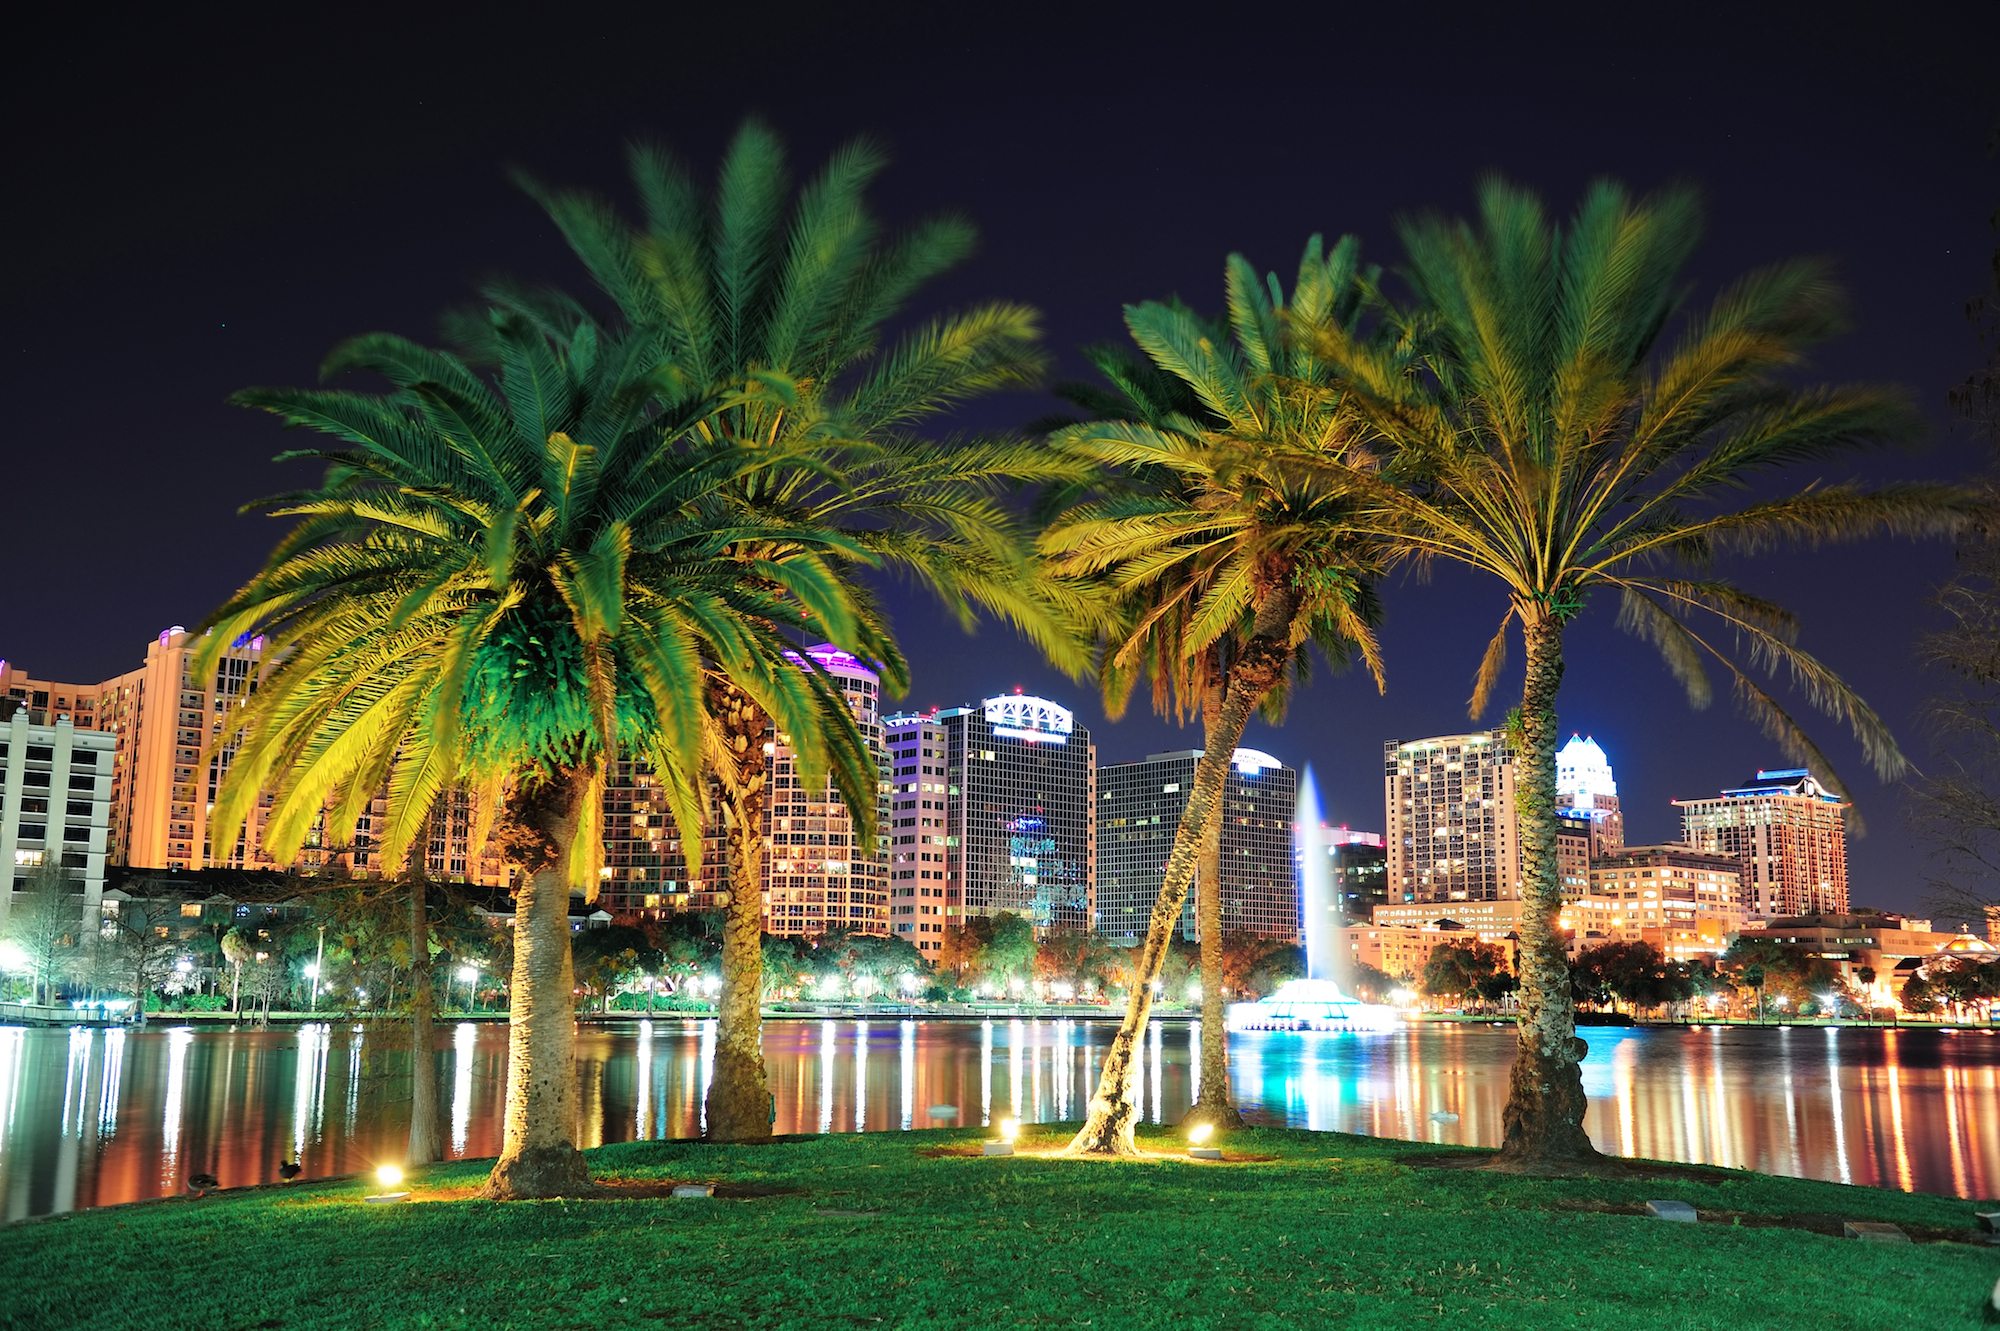 Tips To Plan Your Next Orlando Vacation